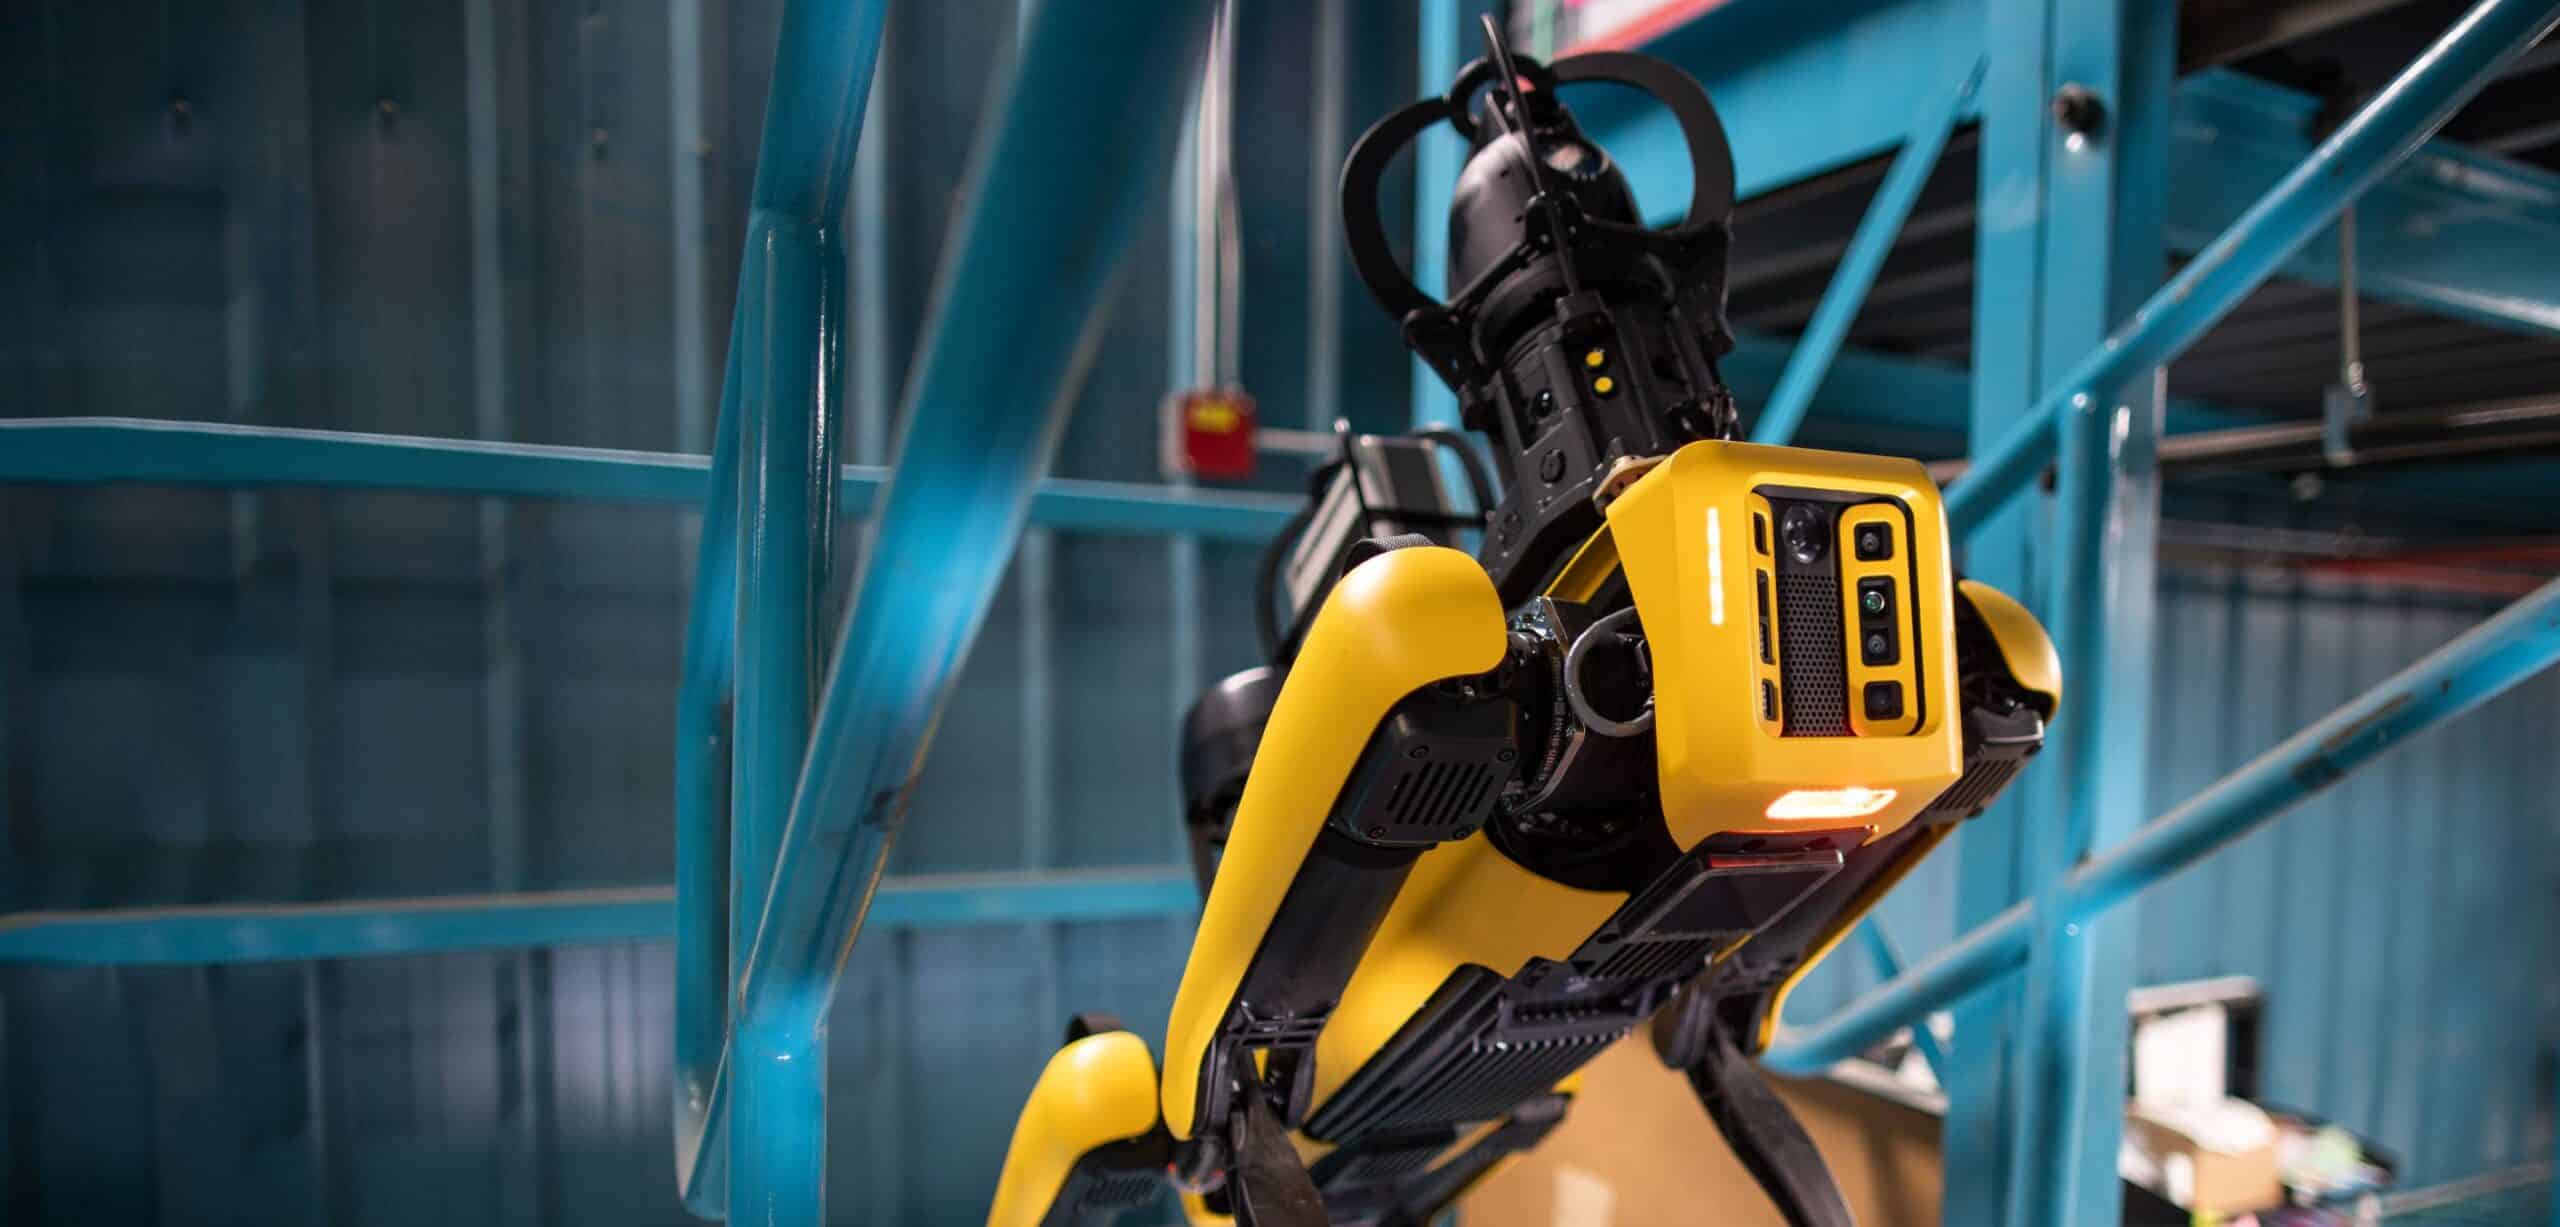 Boston Dynamics upgrades Spot with faster charging, new payloads